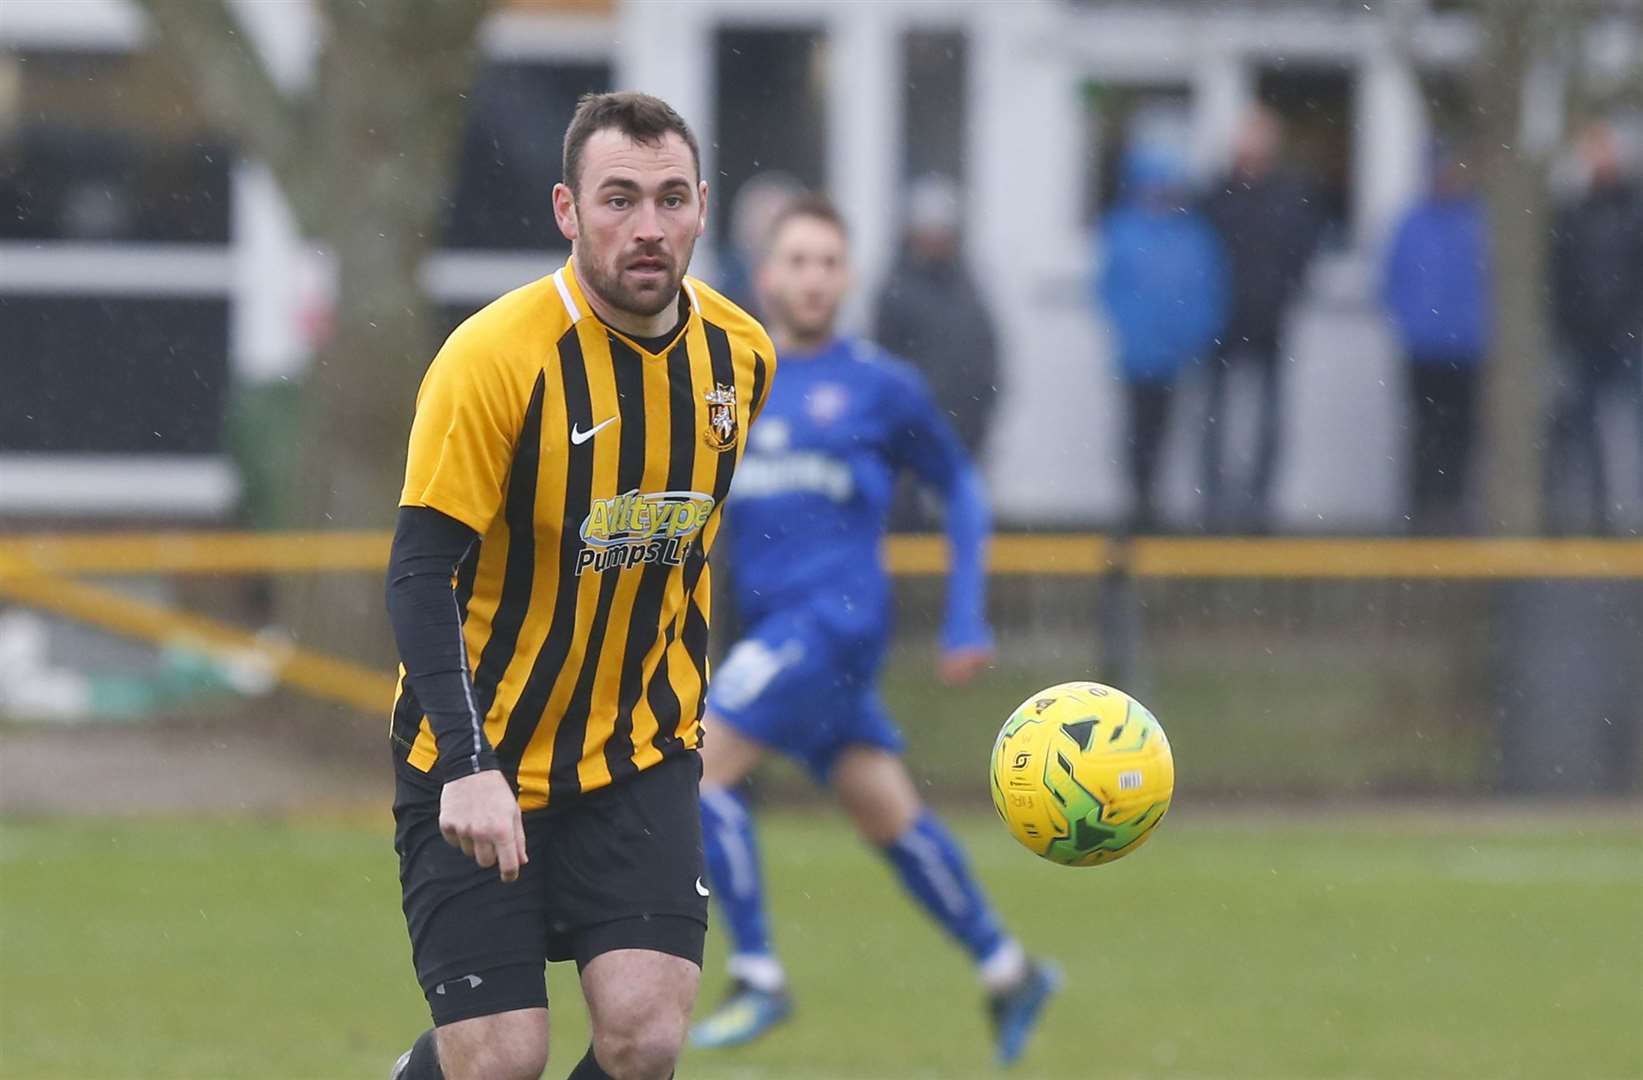 Midfielder Ronnie Dolan bagged a hat-trick in Folkestone's 5-0 victory at Potters Bar. Picture: Andy Jones